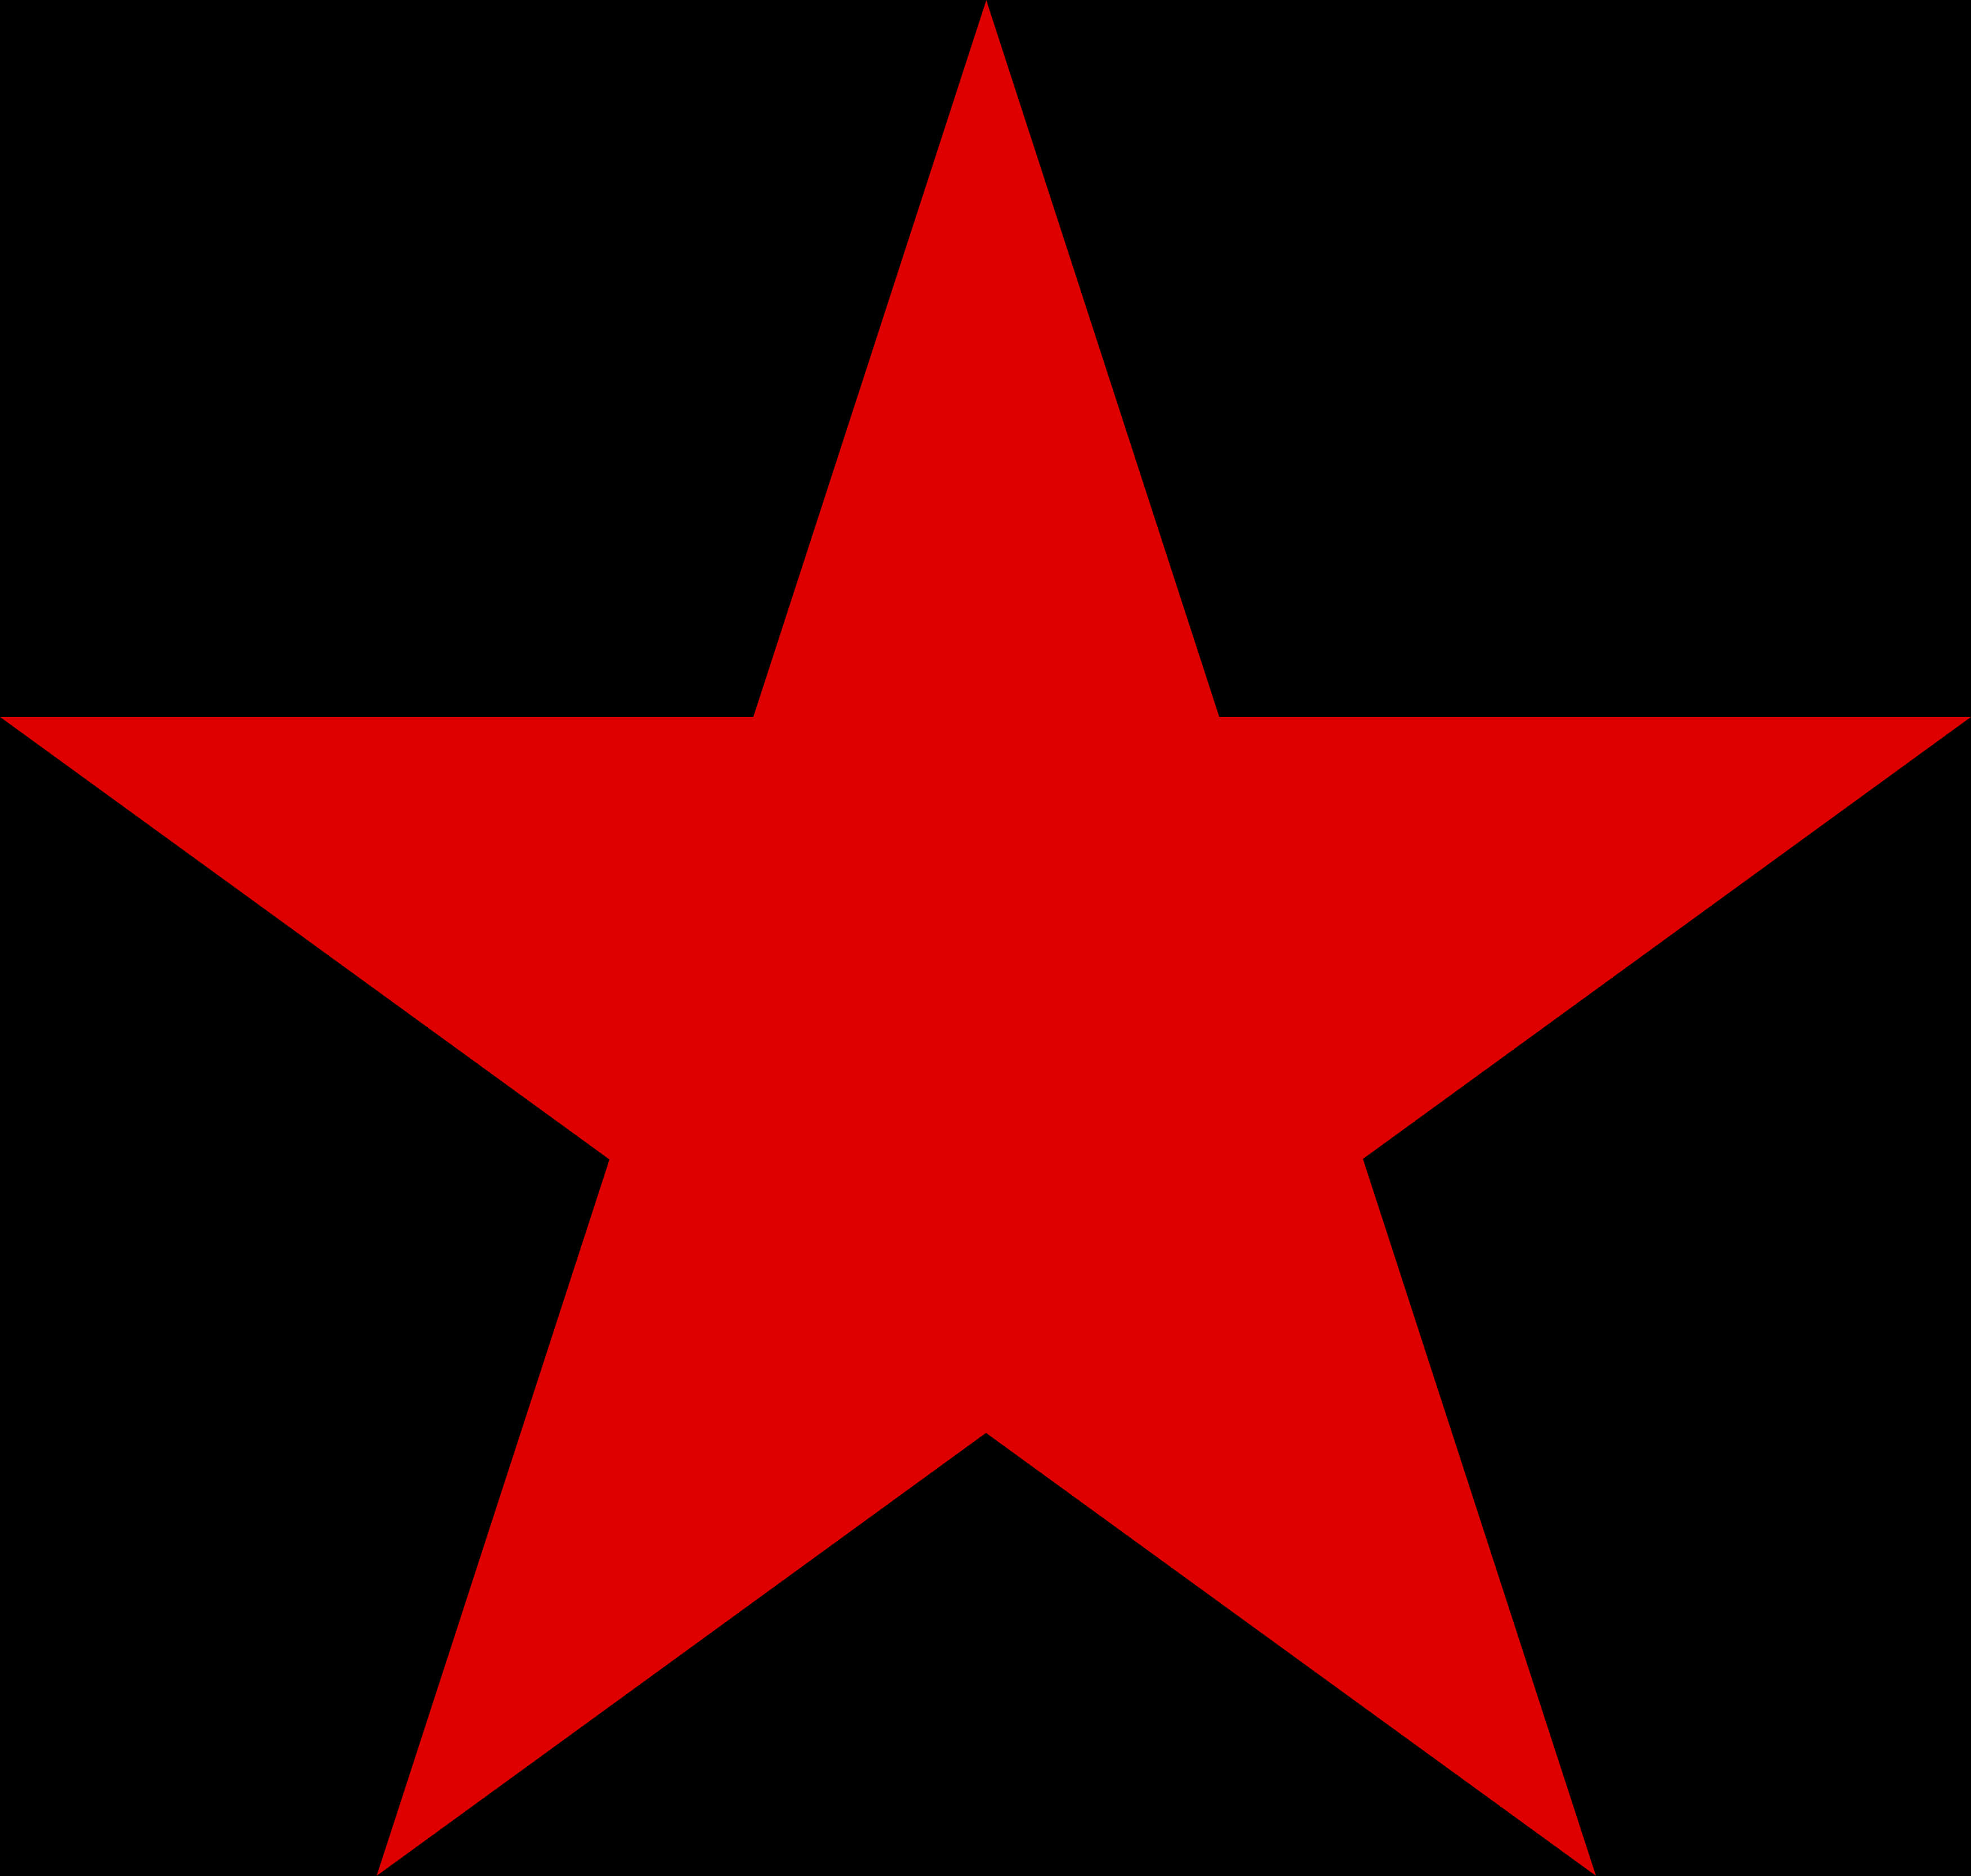 Red Star Jpg, Hd Png Download